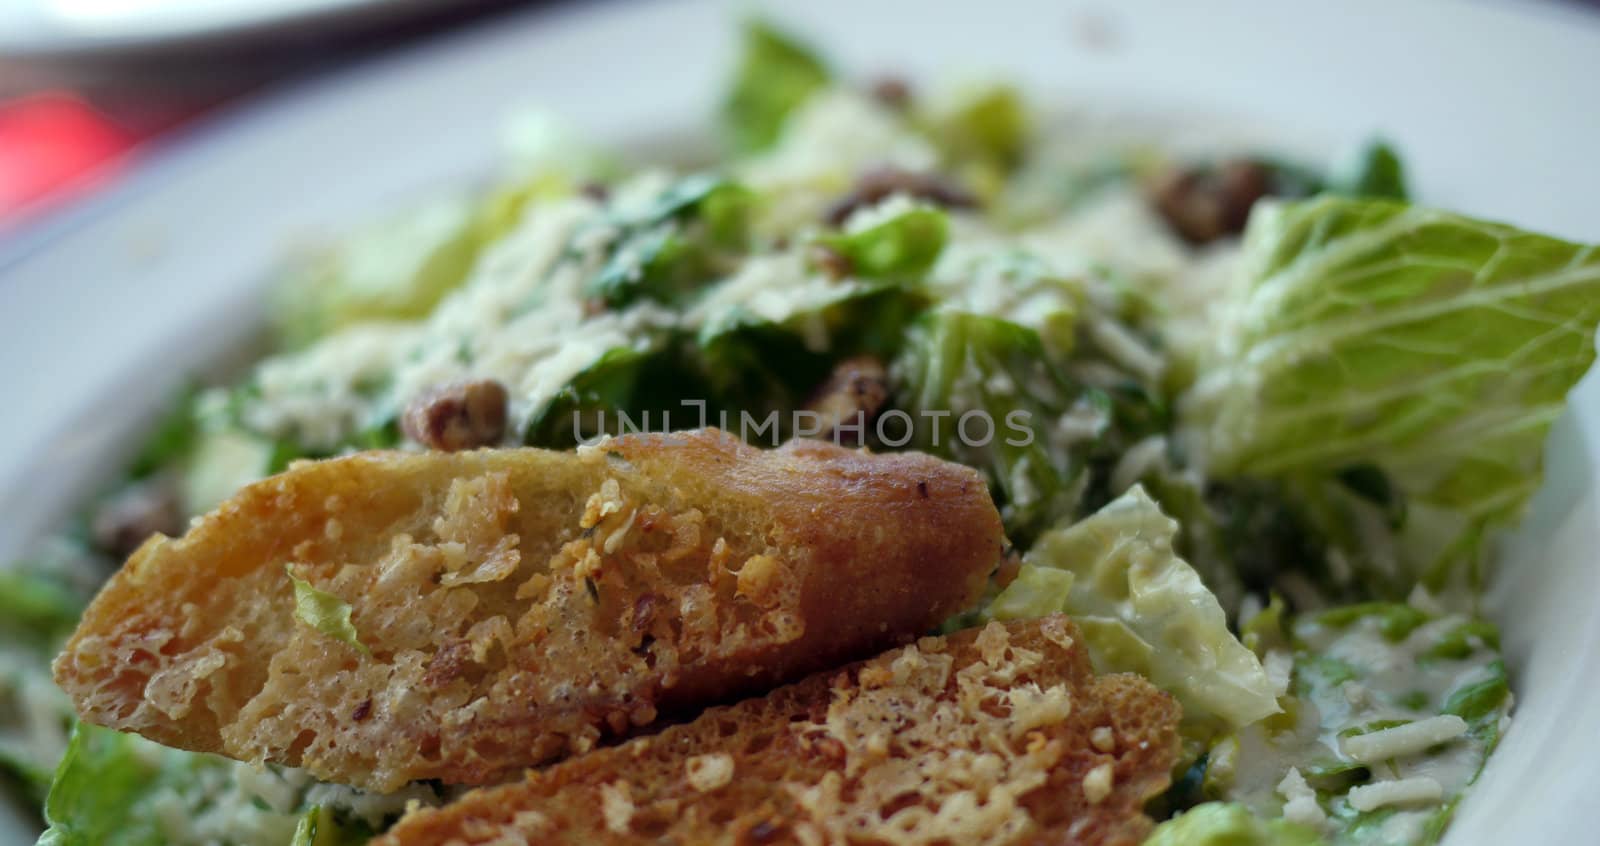 crouton on a ceasar salad by seattlephoto